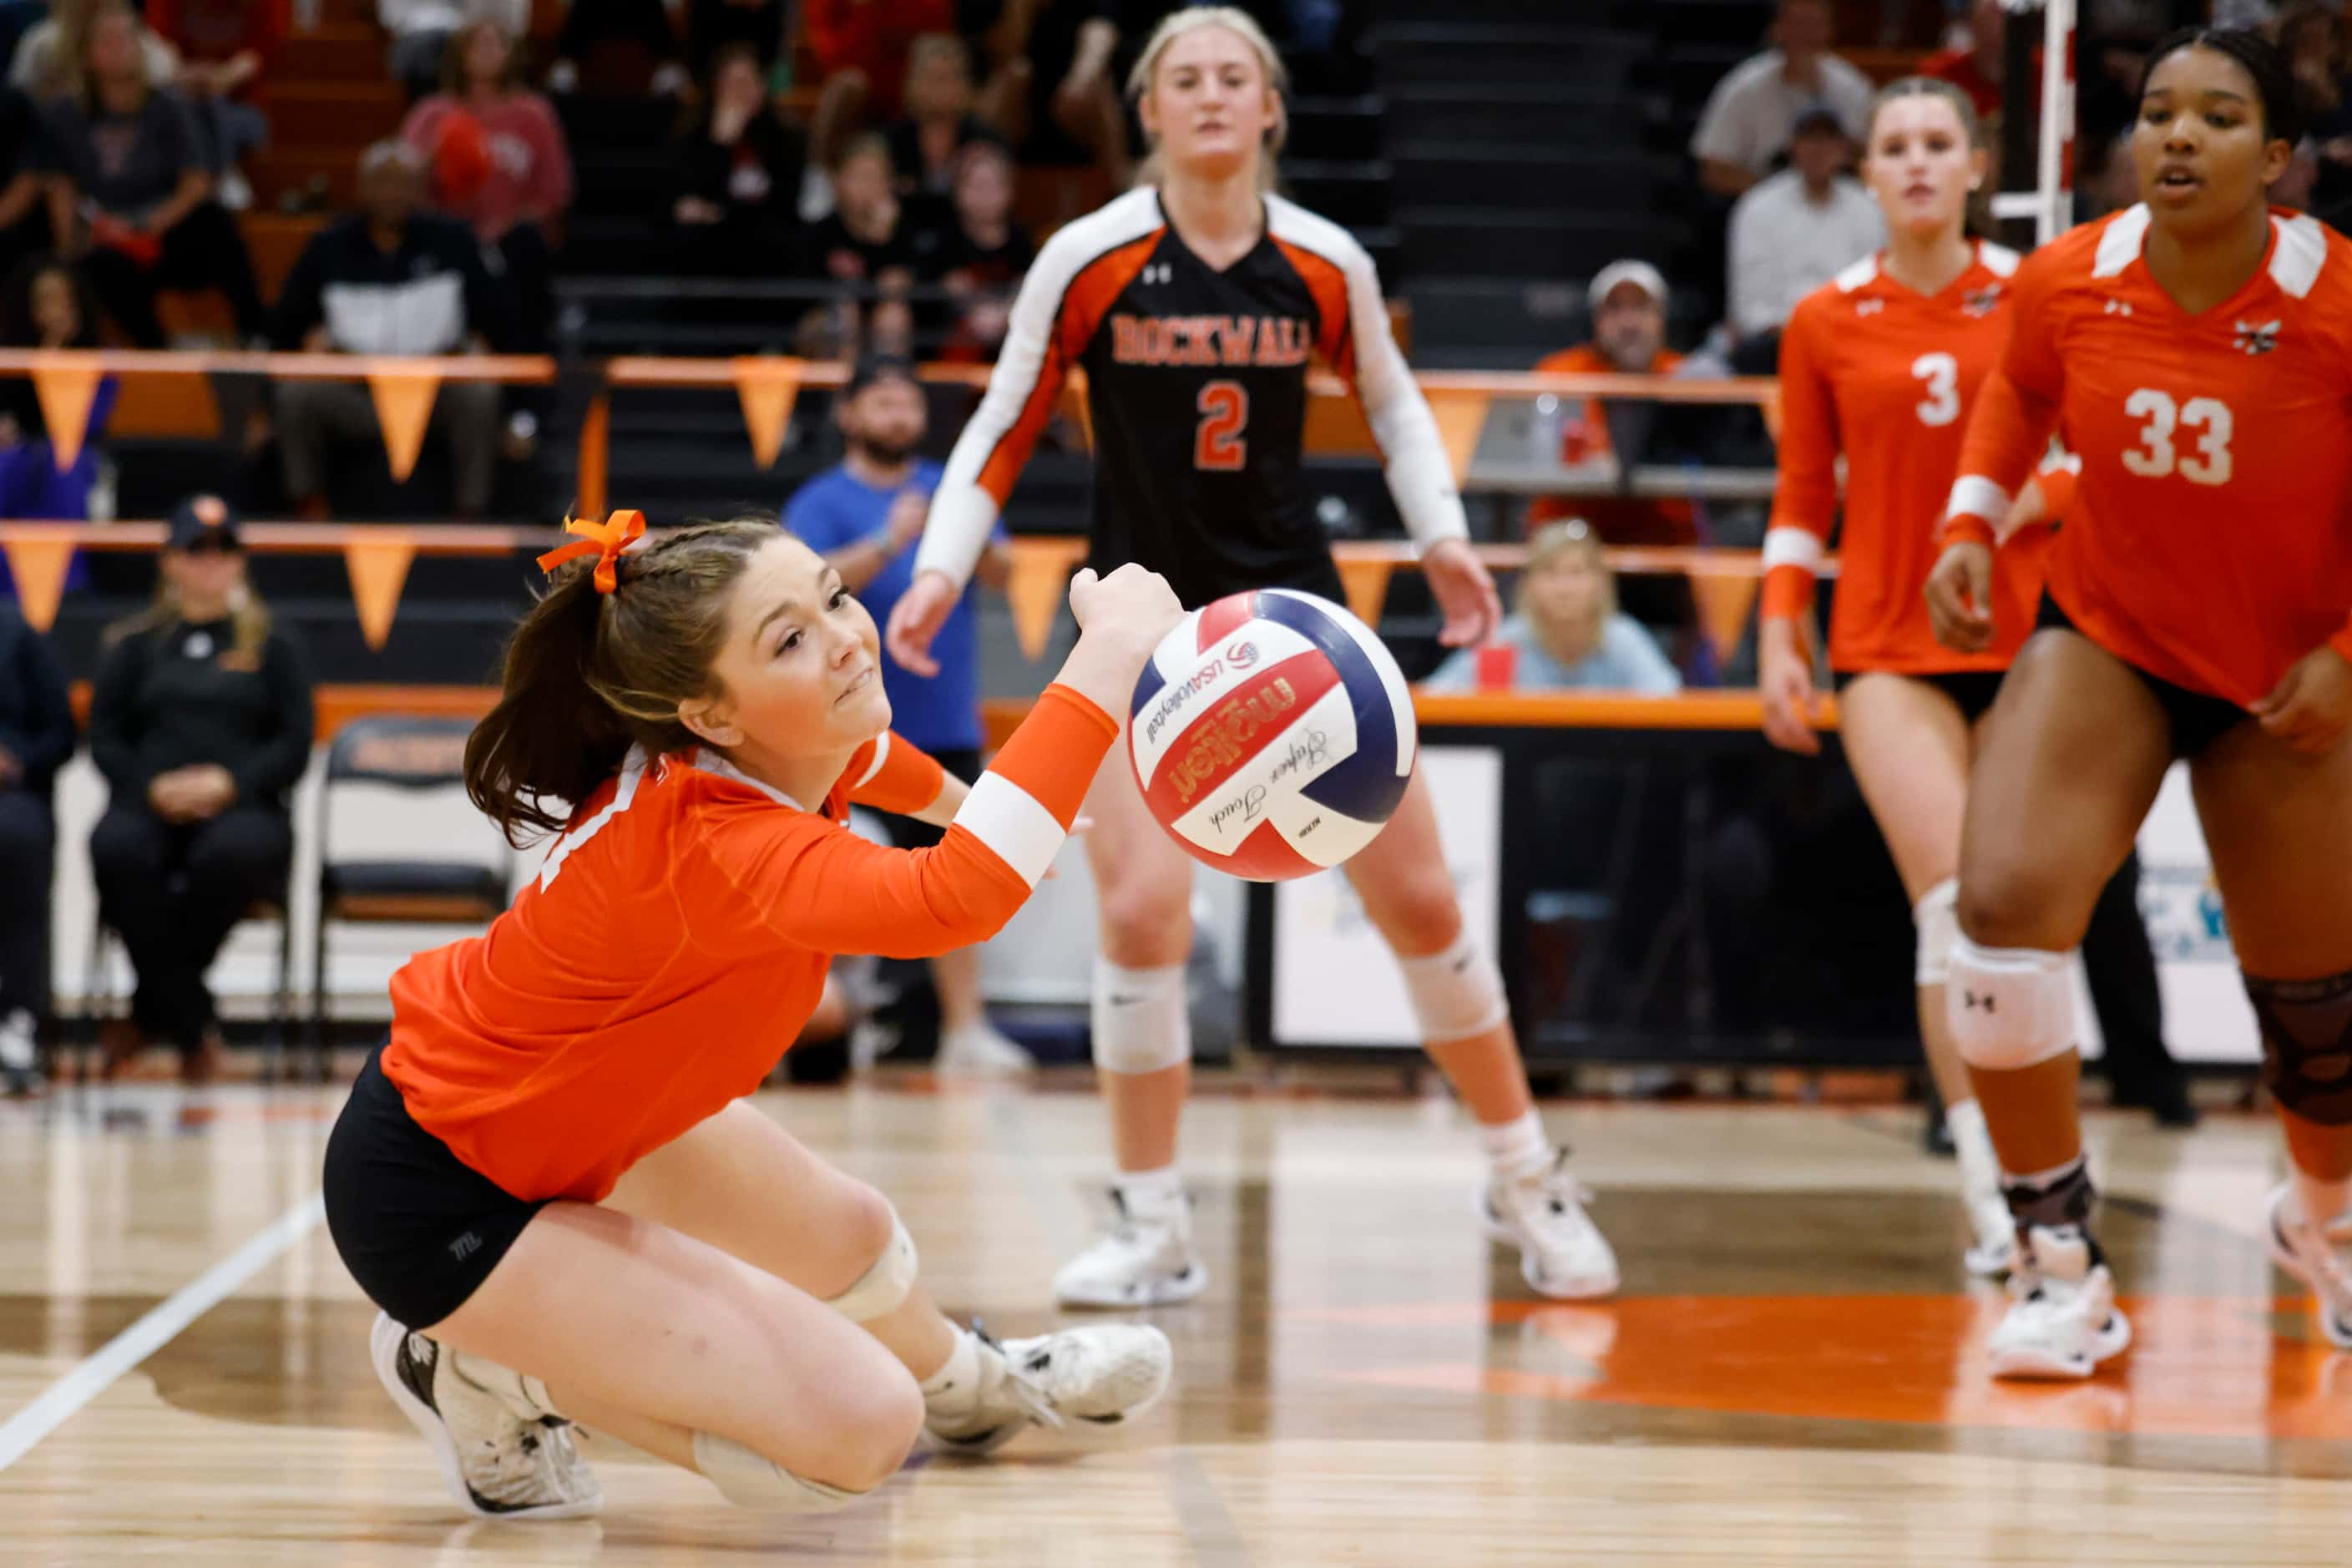 Rockwall high’s Gabi Ashcraft misses to save a point during a volleyball game against...